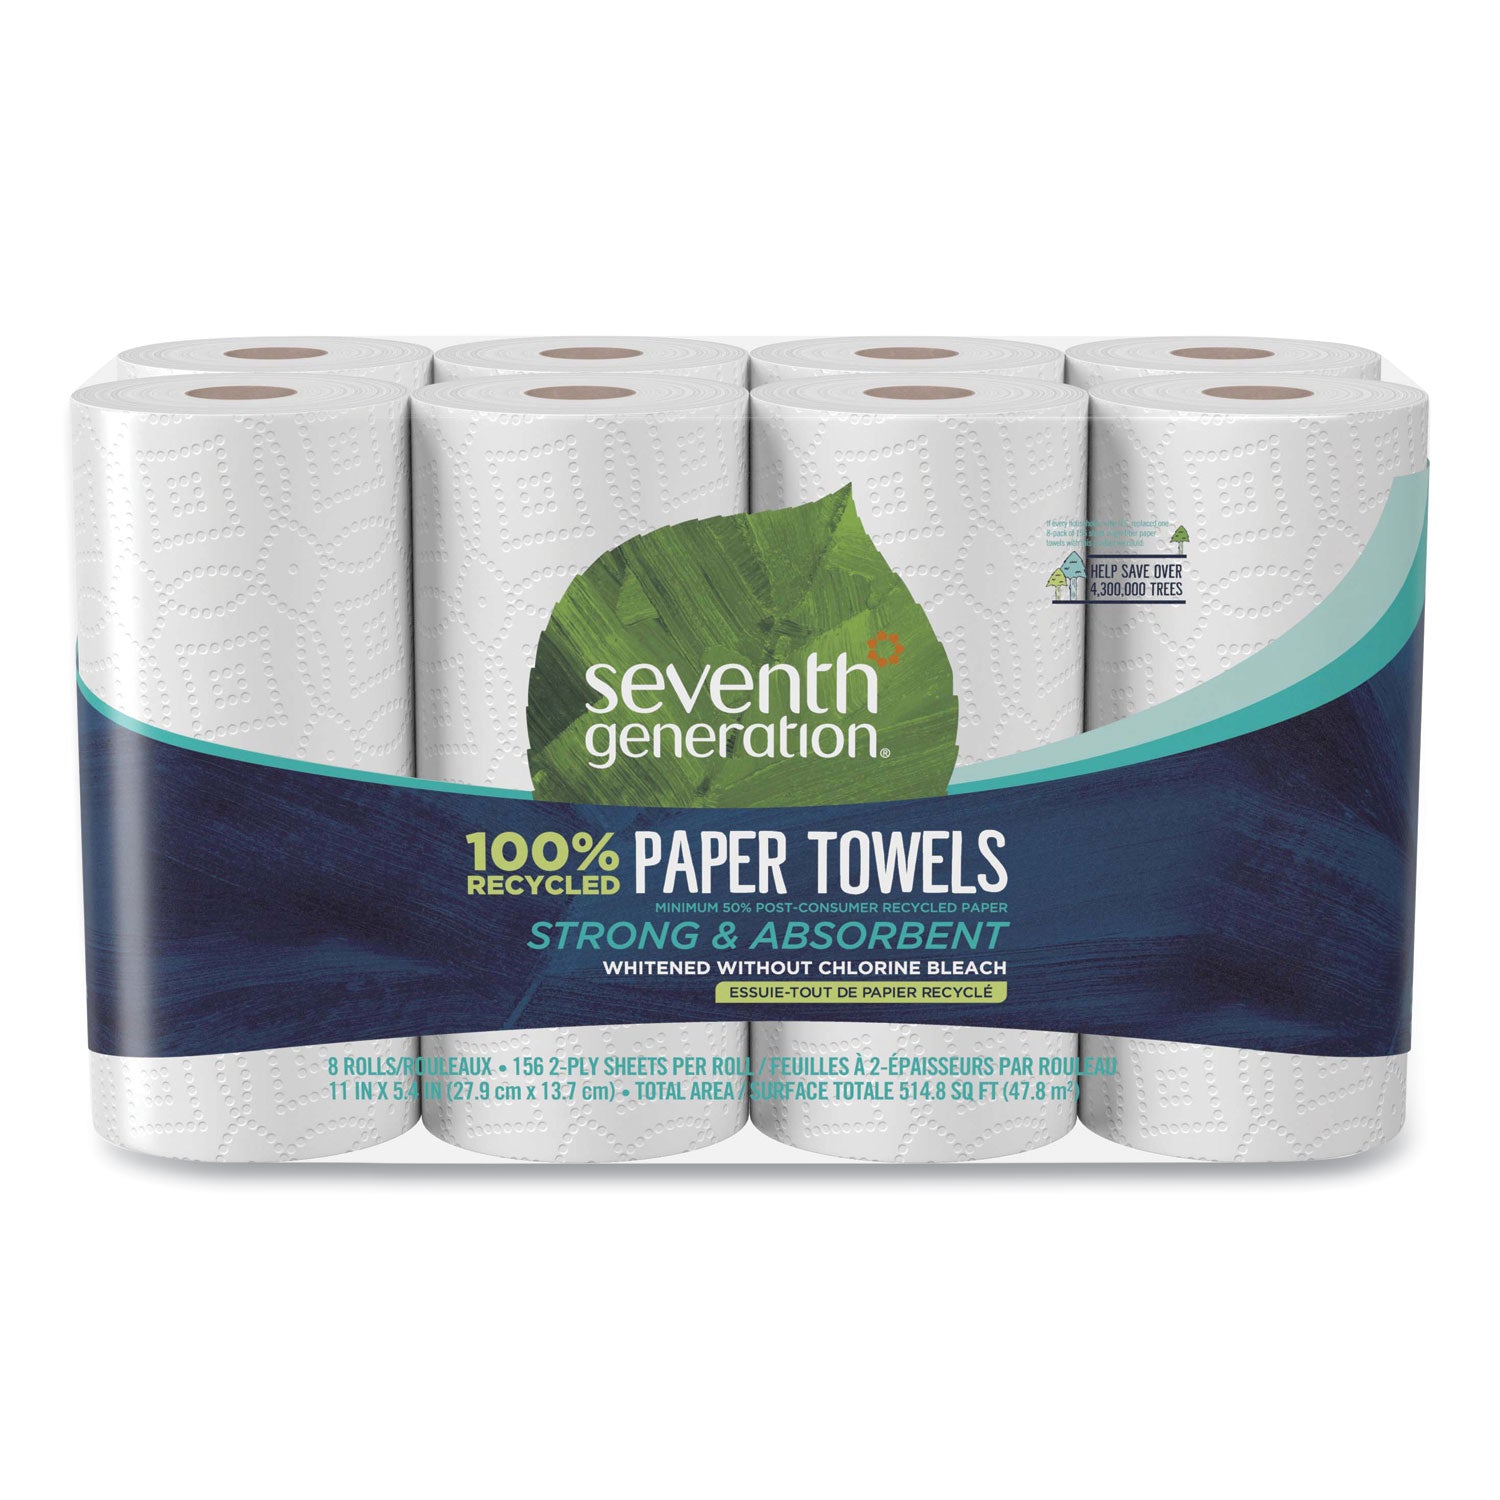 100% Recycled Paper Kitchen Towel Rolls, 2-Ply, 11 x 5.4, 156 Sheets/Rolls, 32 Rolls/Carton - 